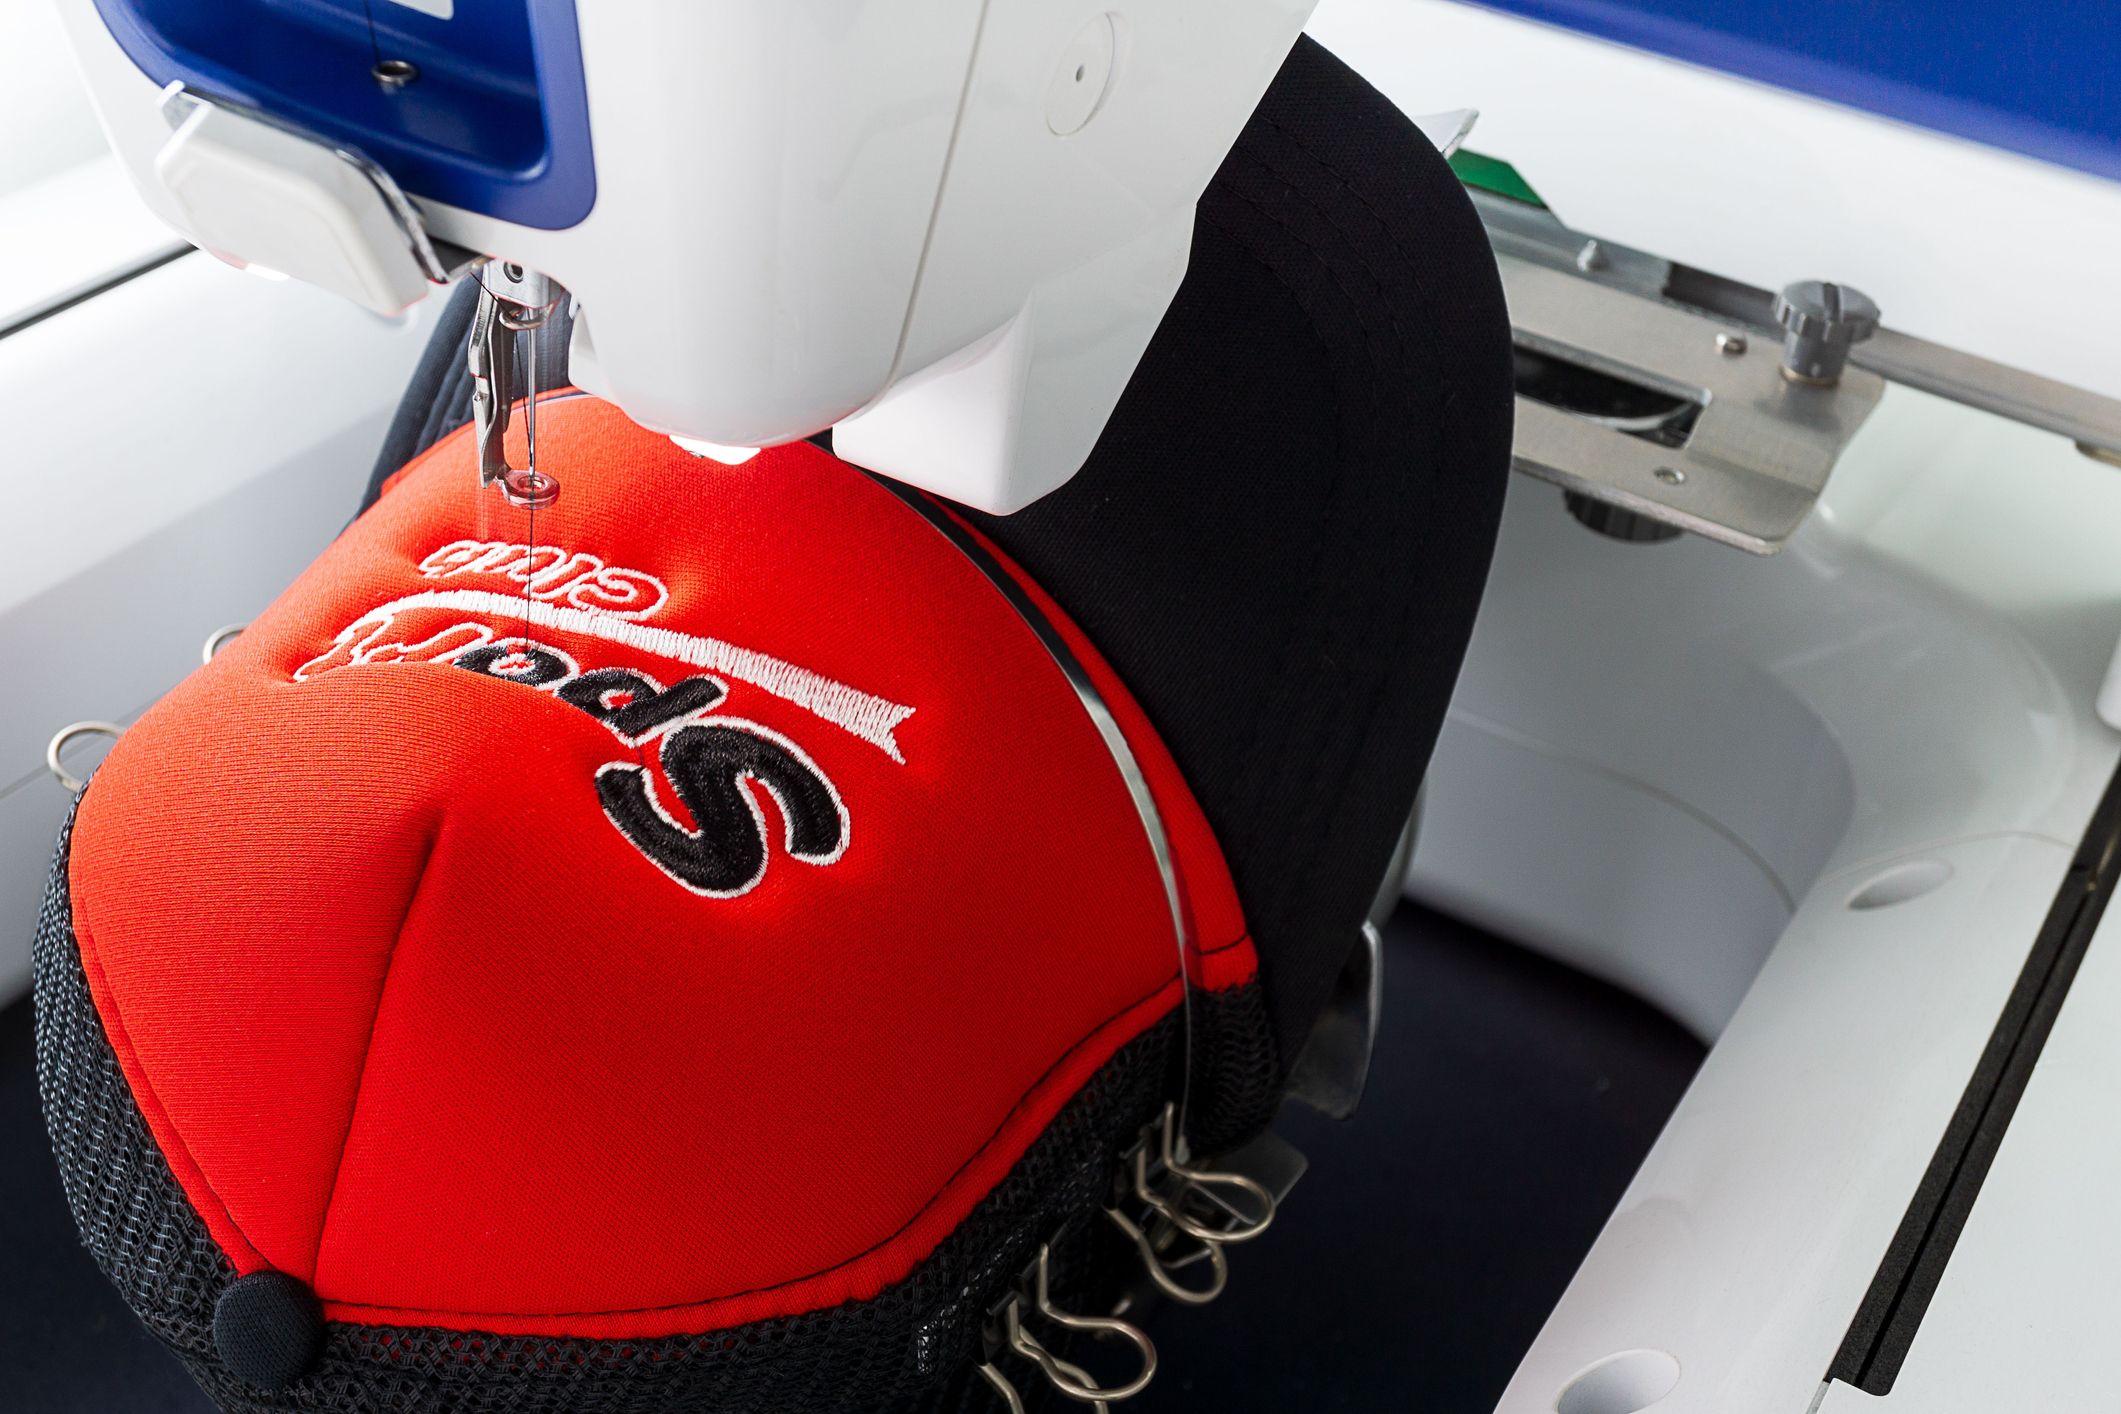 Branded hat being embroidered